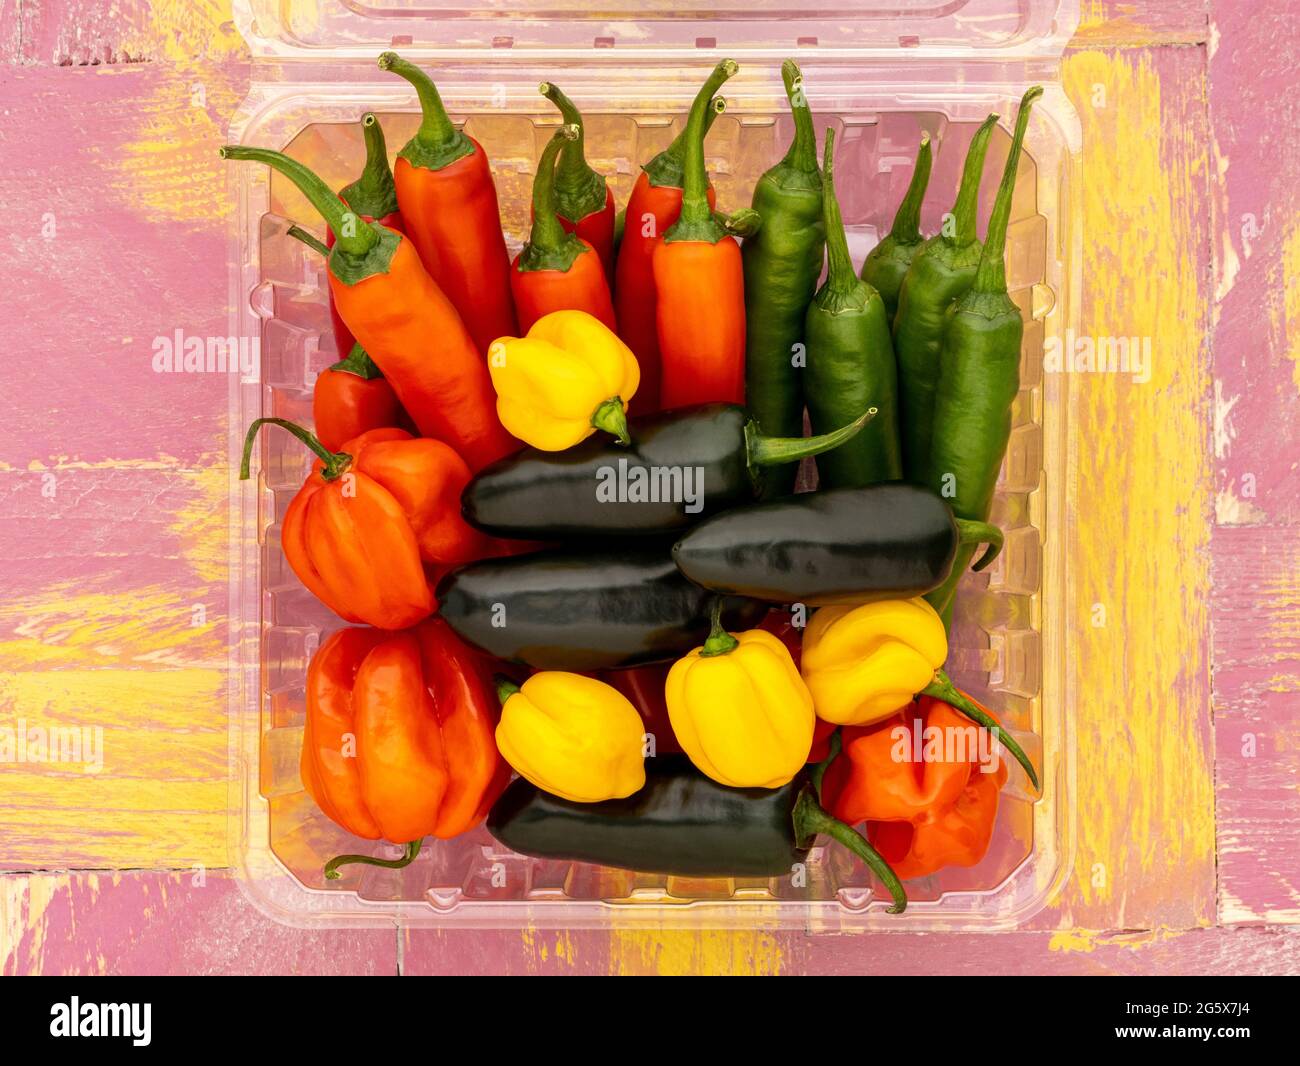 Plan view of assorted chilli peppers in a clear plastic carton, on a pink and yellow wooden rustic background. Stock Photo